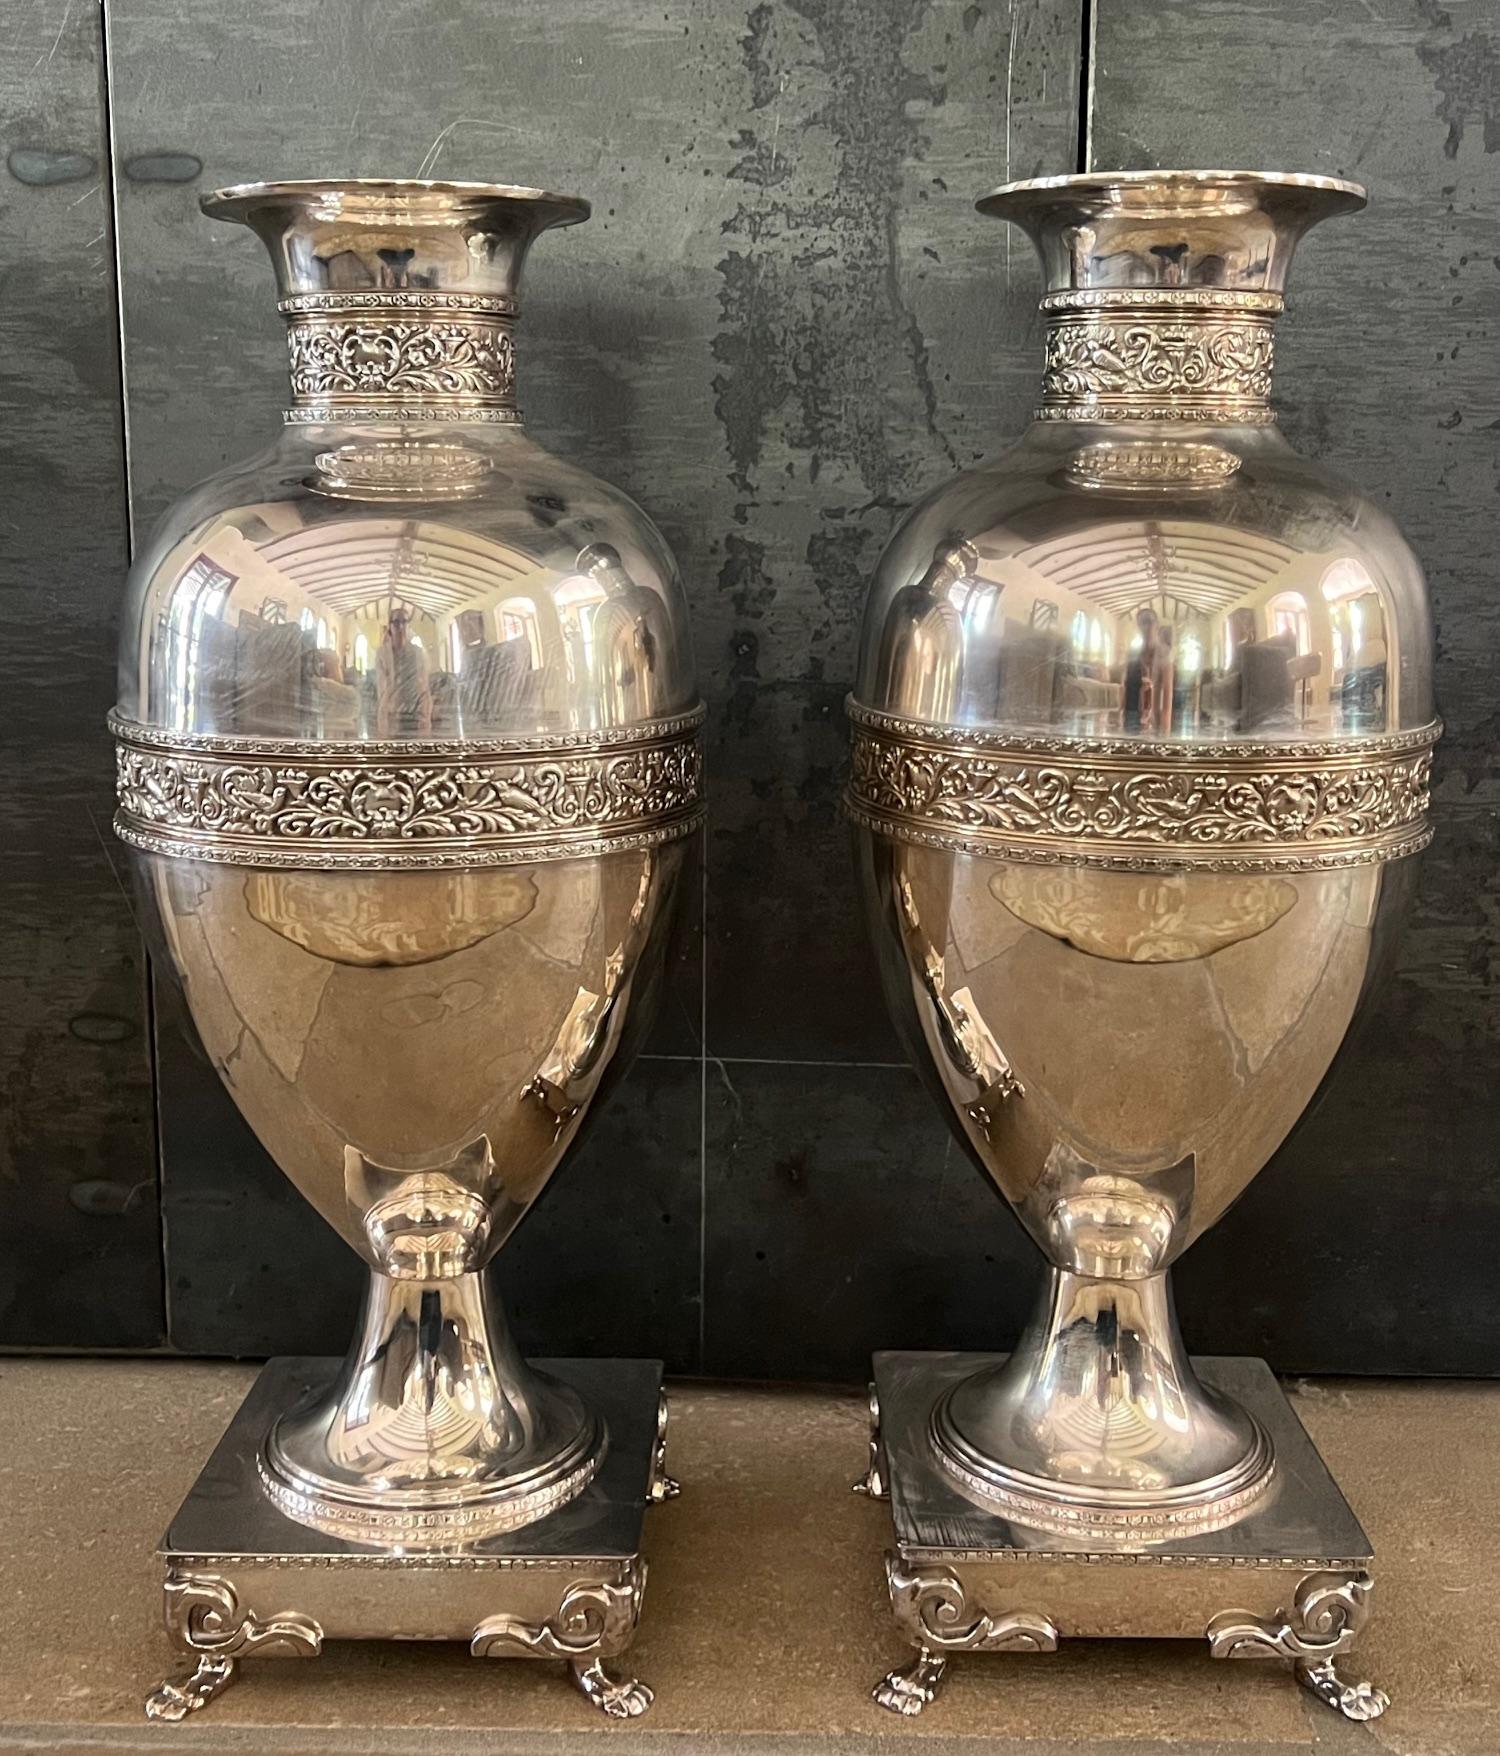 British Large Antique Silverplated Urns, Set of 2 For Sale